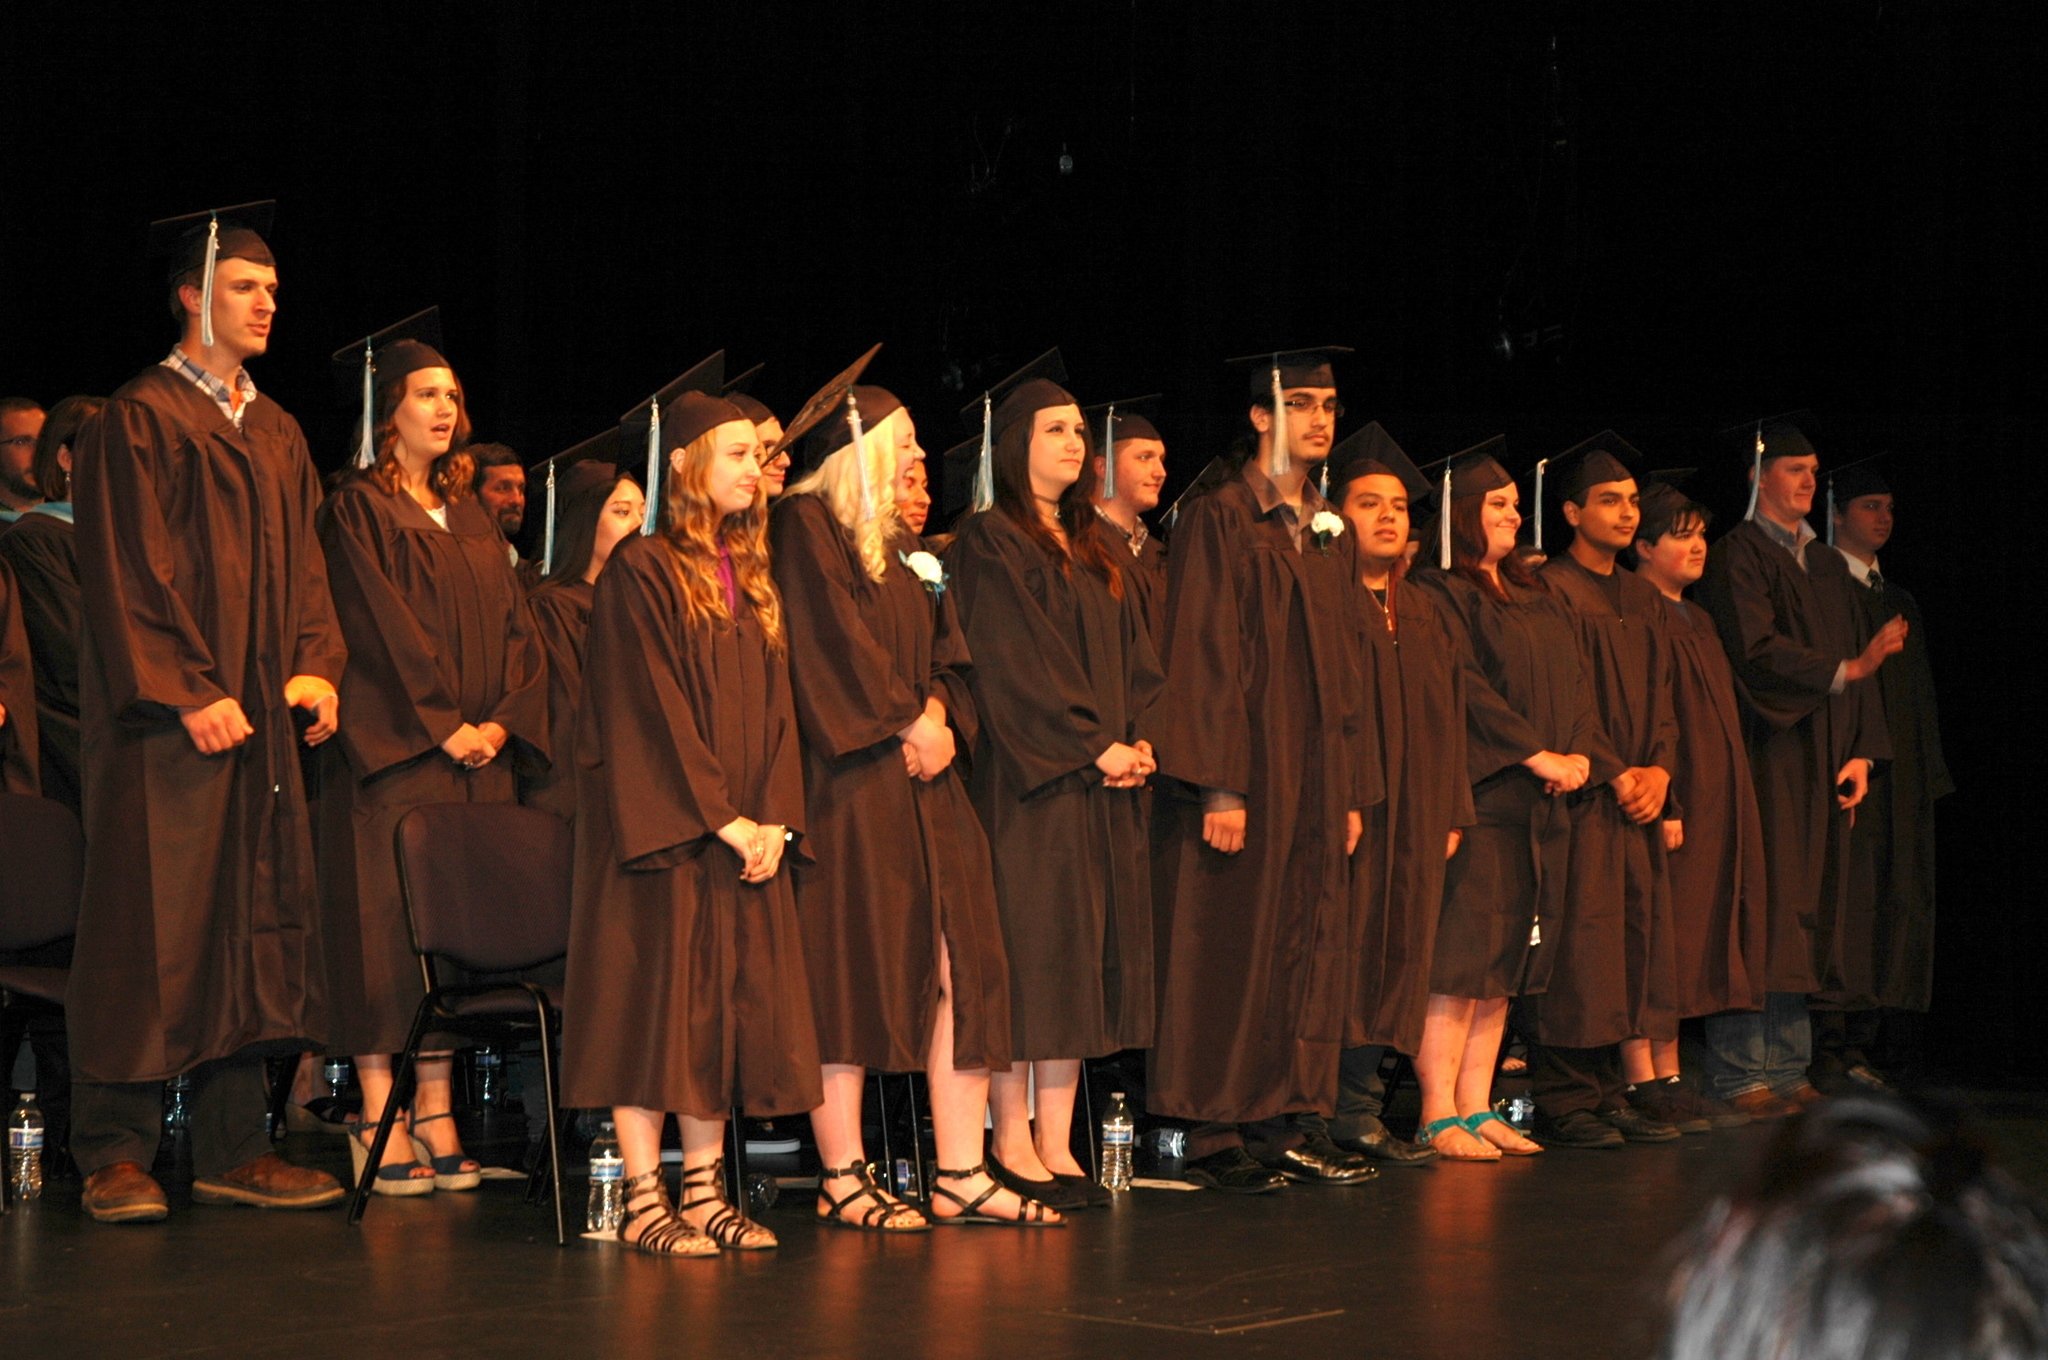 Kirk Boxleitner/Staff PhotoWeston High School’s graduating class of 2016 was lauded for earning diplomas while shouldering responsibilities such as full-time employment and parenthood.